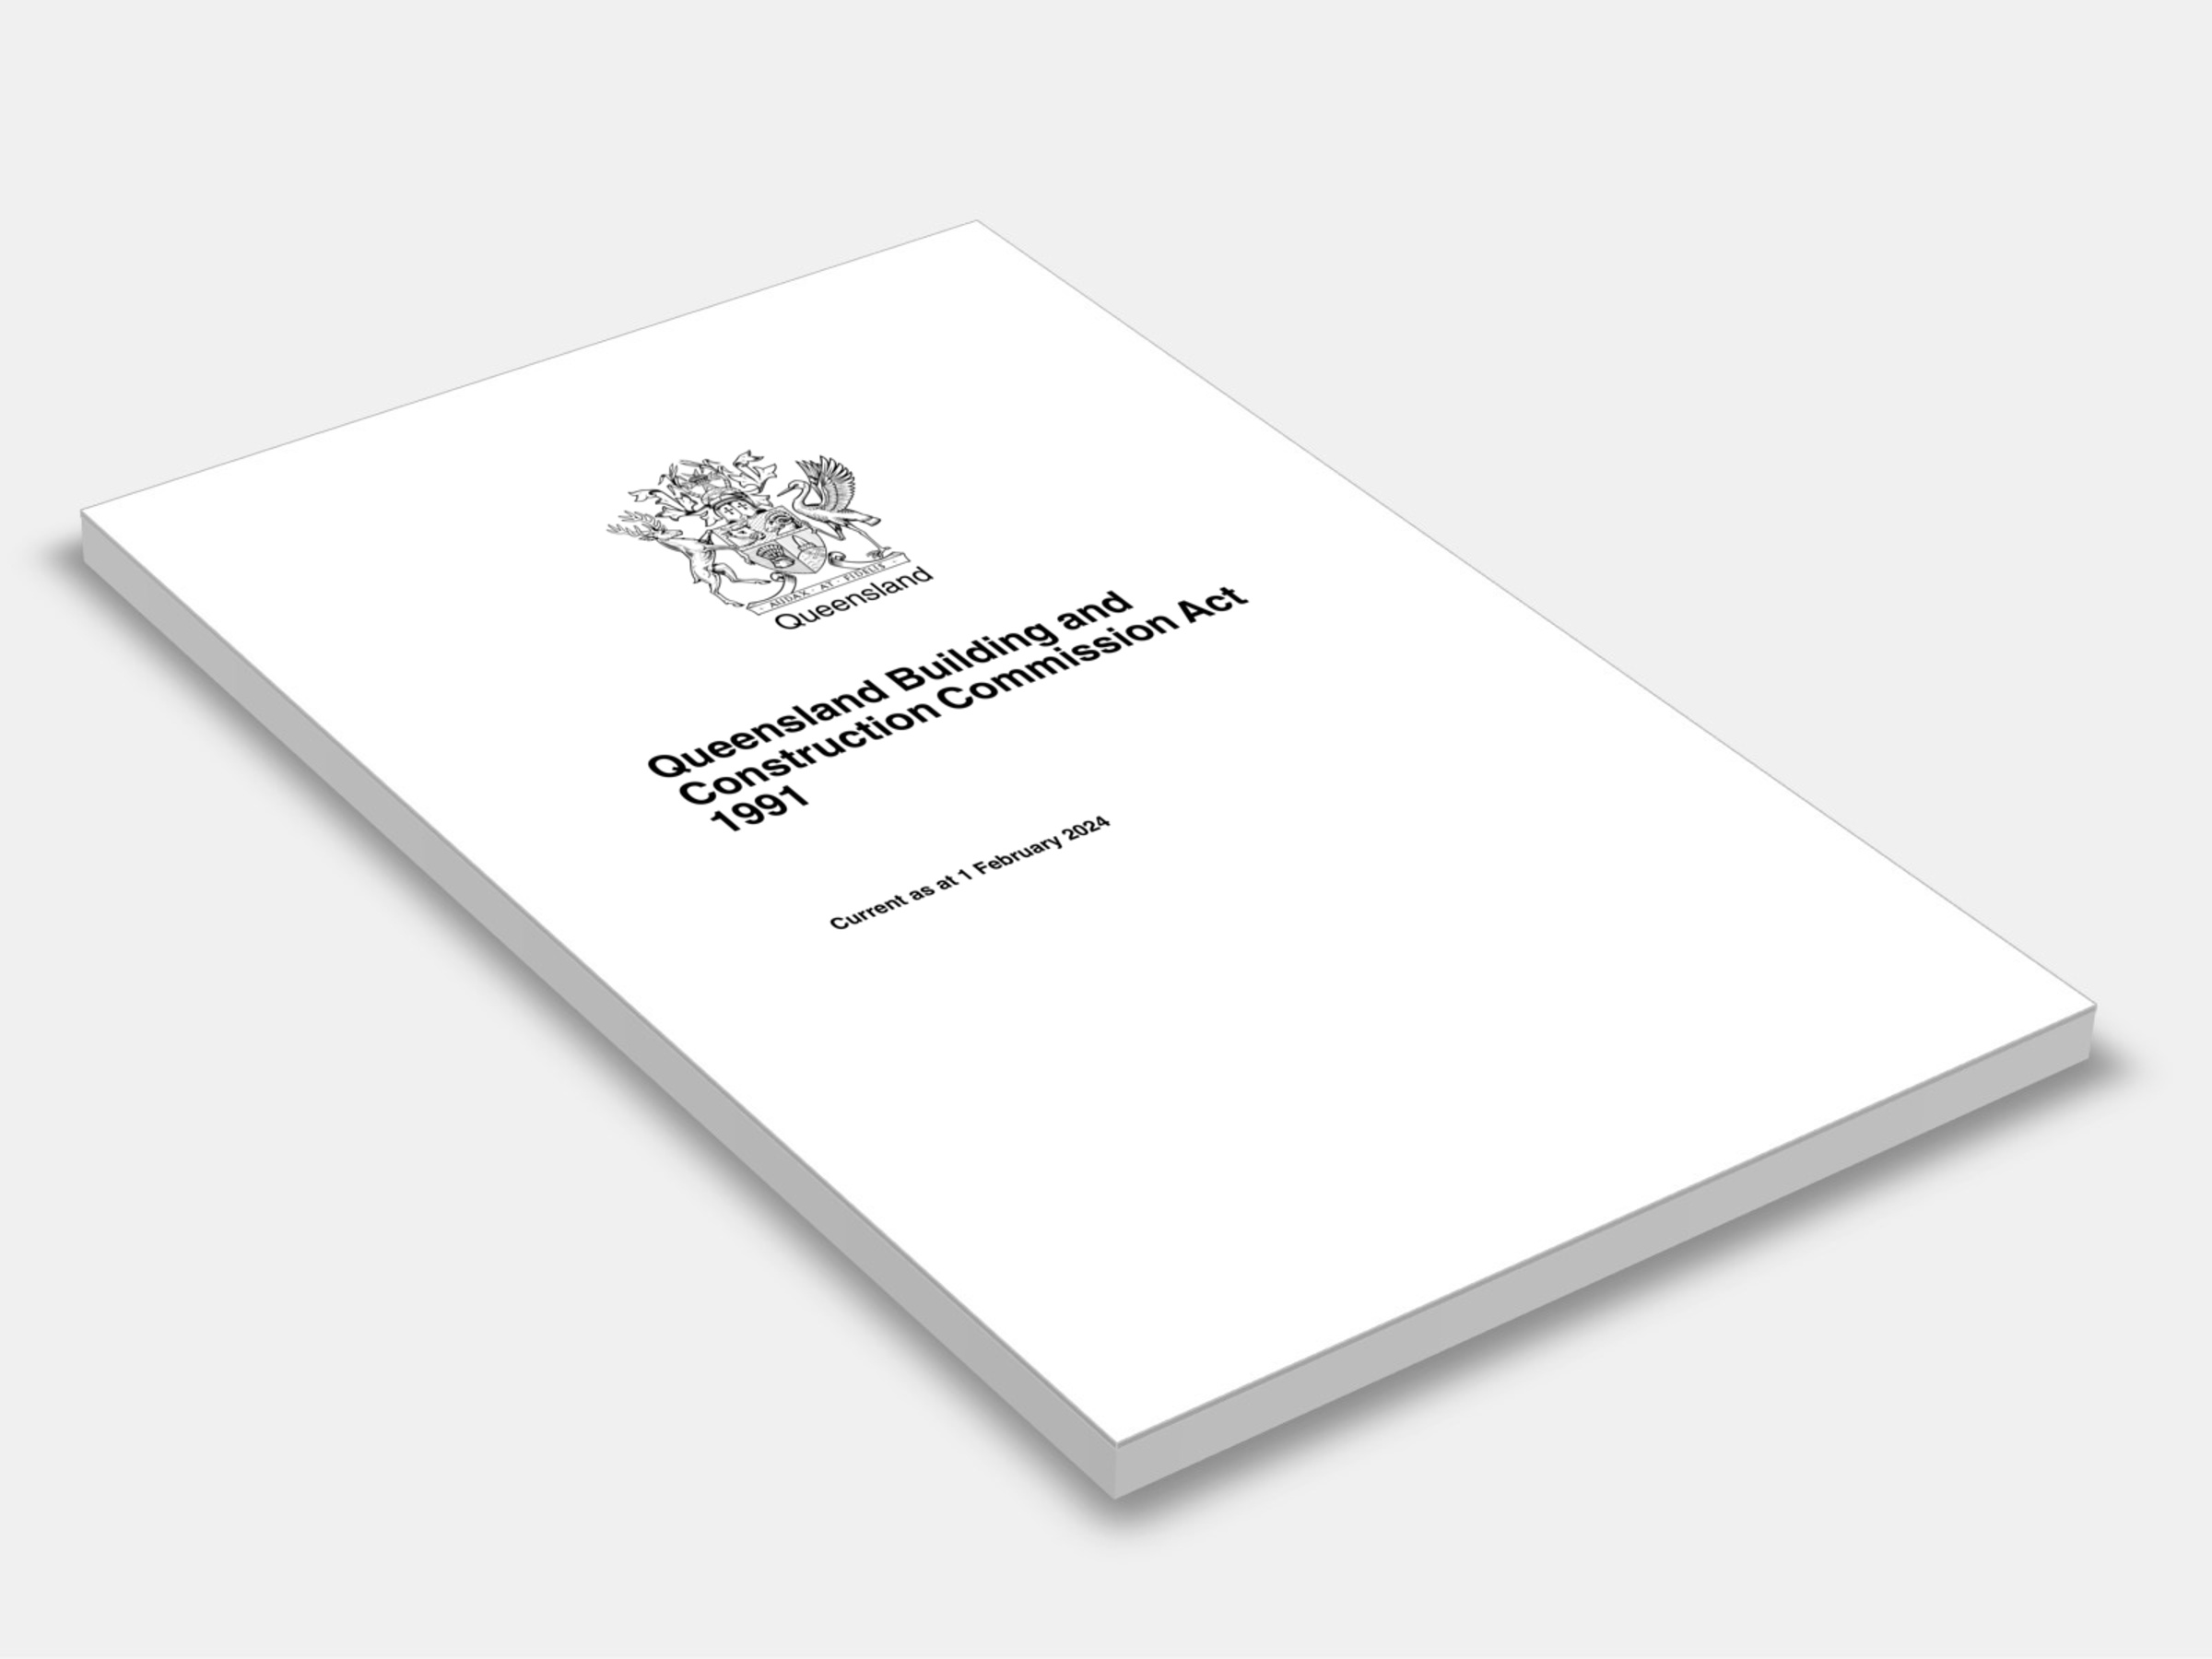 Queensland Building and Construction Commission Act 1991 (QLD) 1991 cover